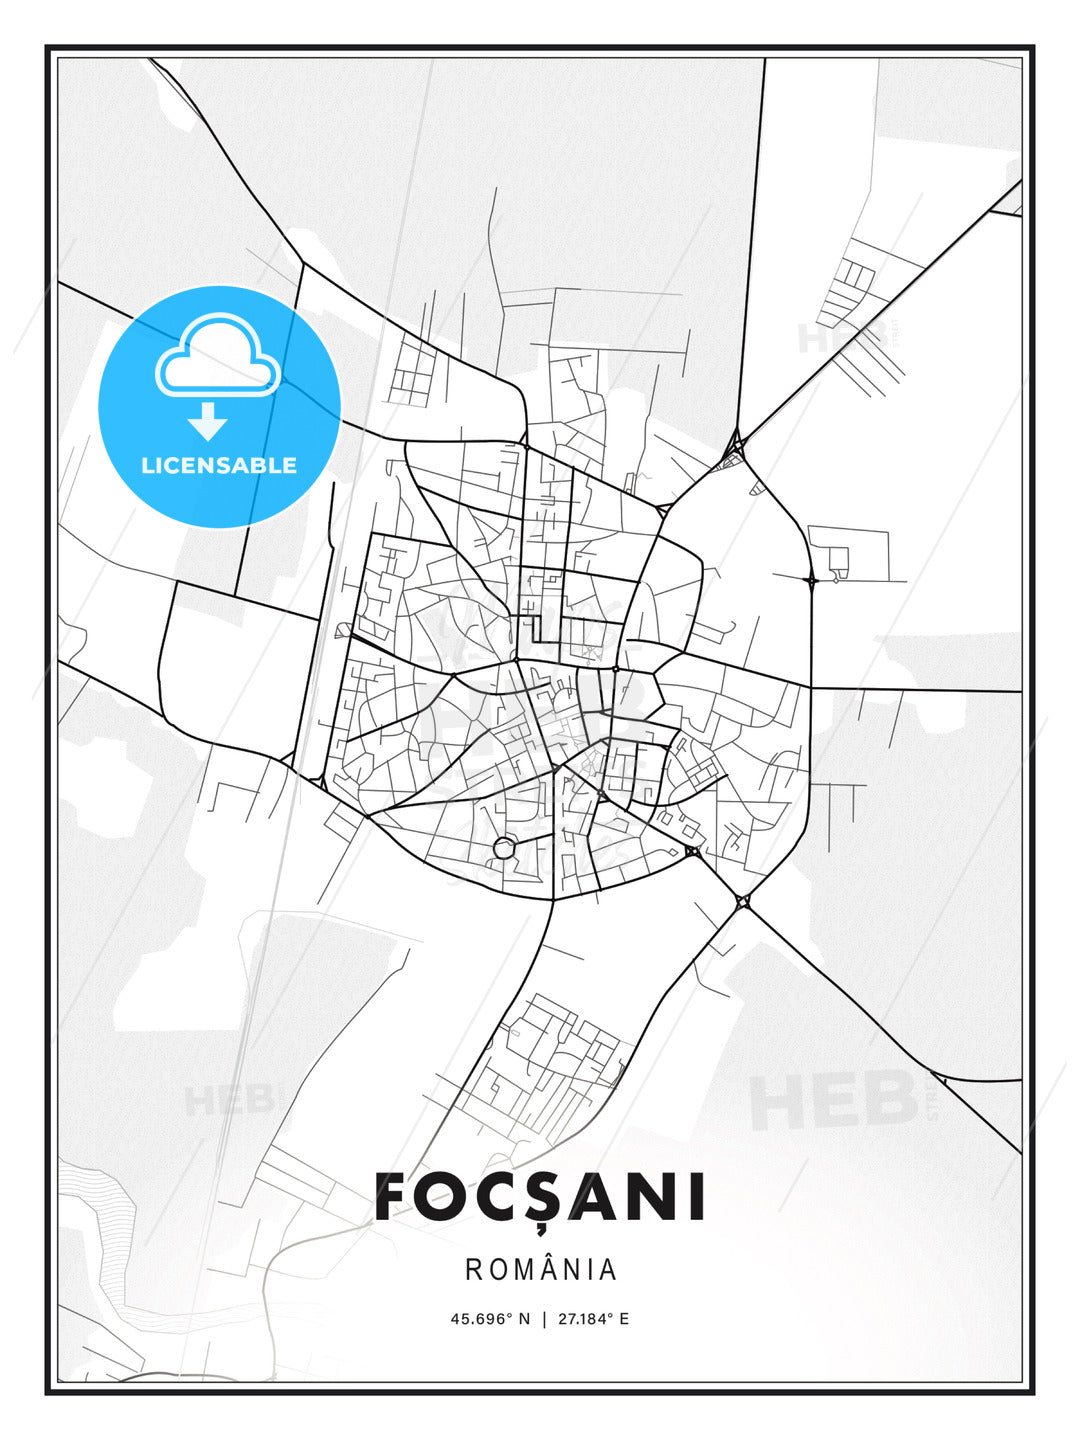 Focșani, Romania, Modern Print Template in Various Formats - HEBSTREITS Sketches